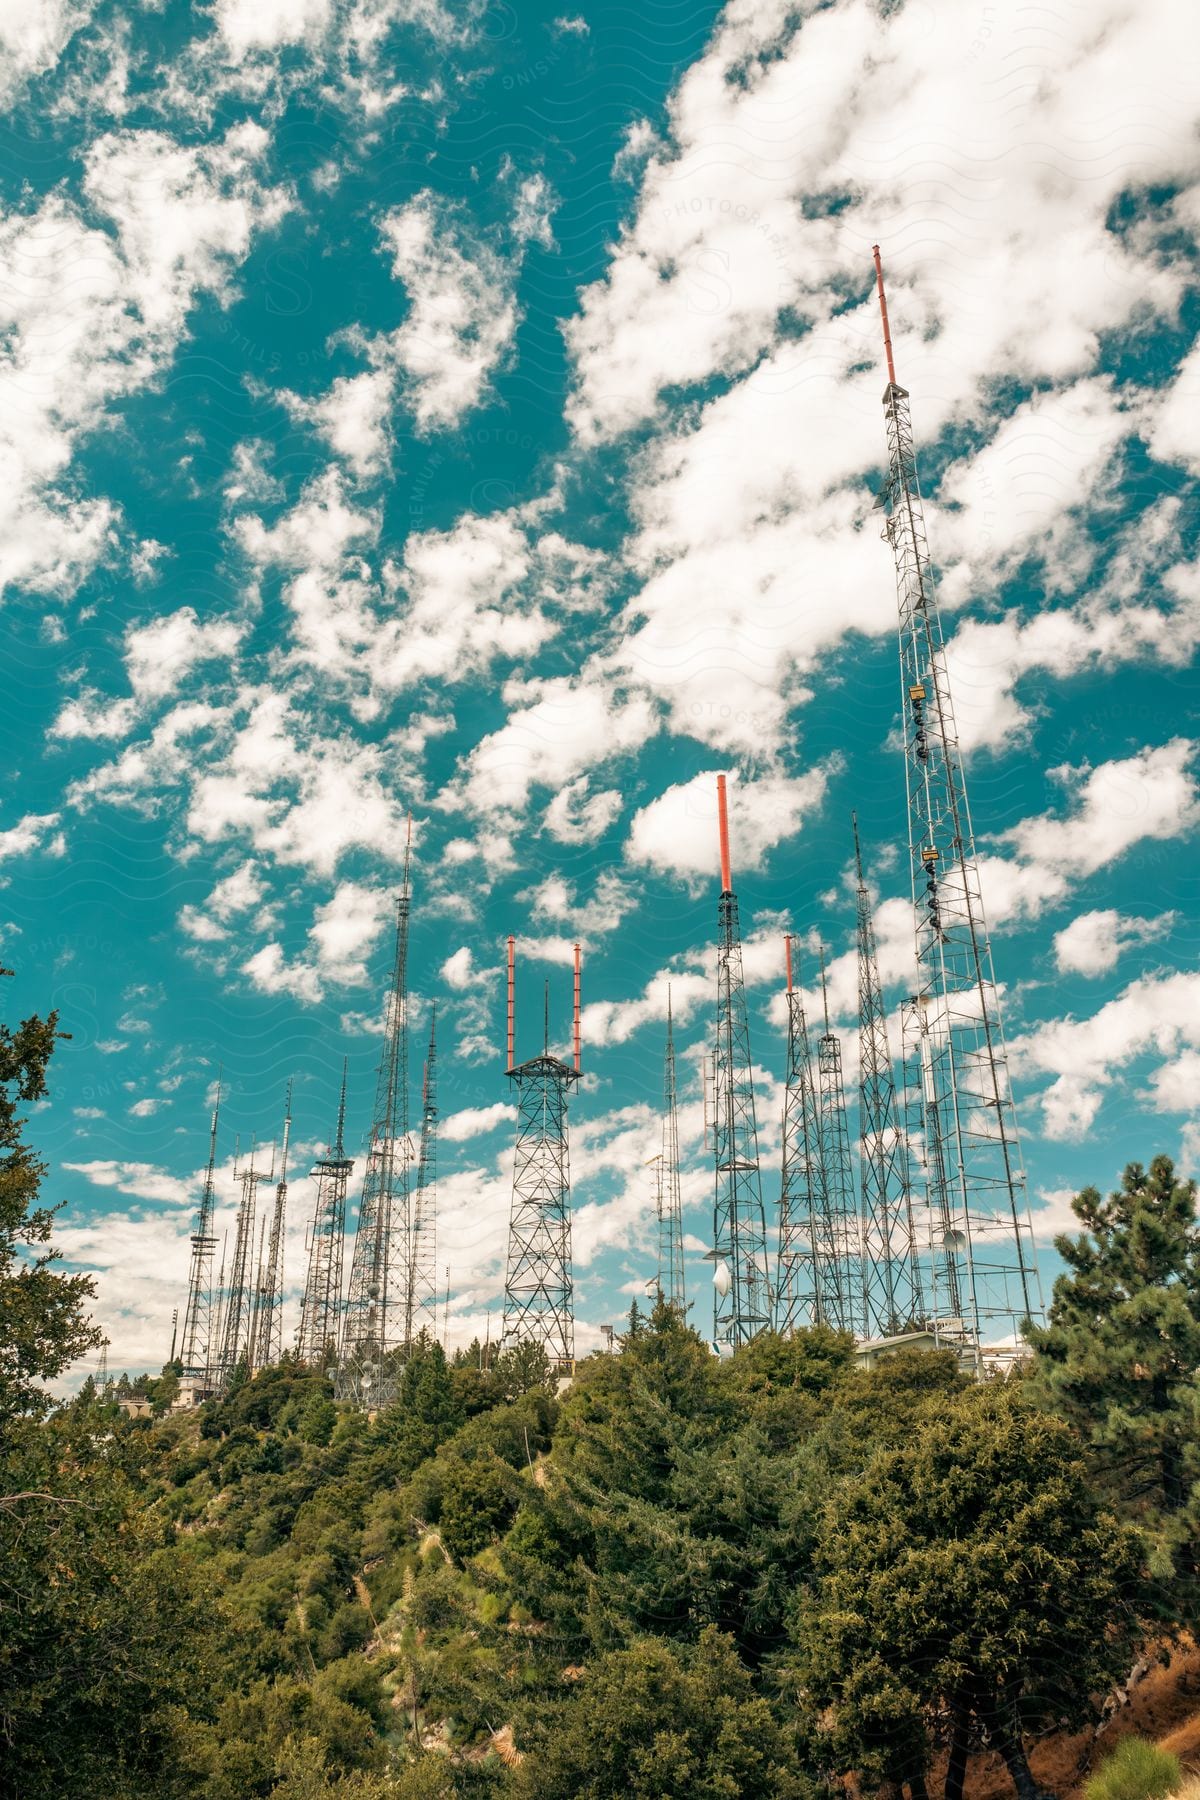 Electricity power station towers stand tall above a forest of trees under a blue sky with scattered clouds during the day